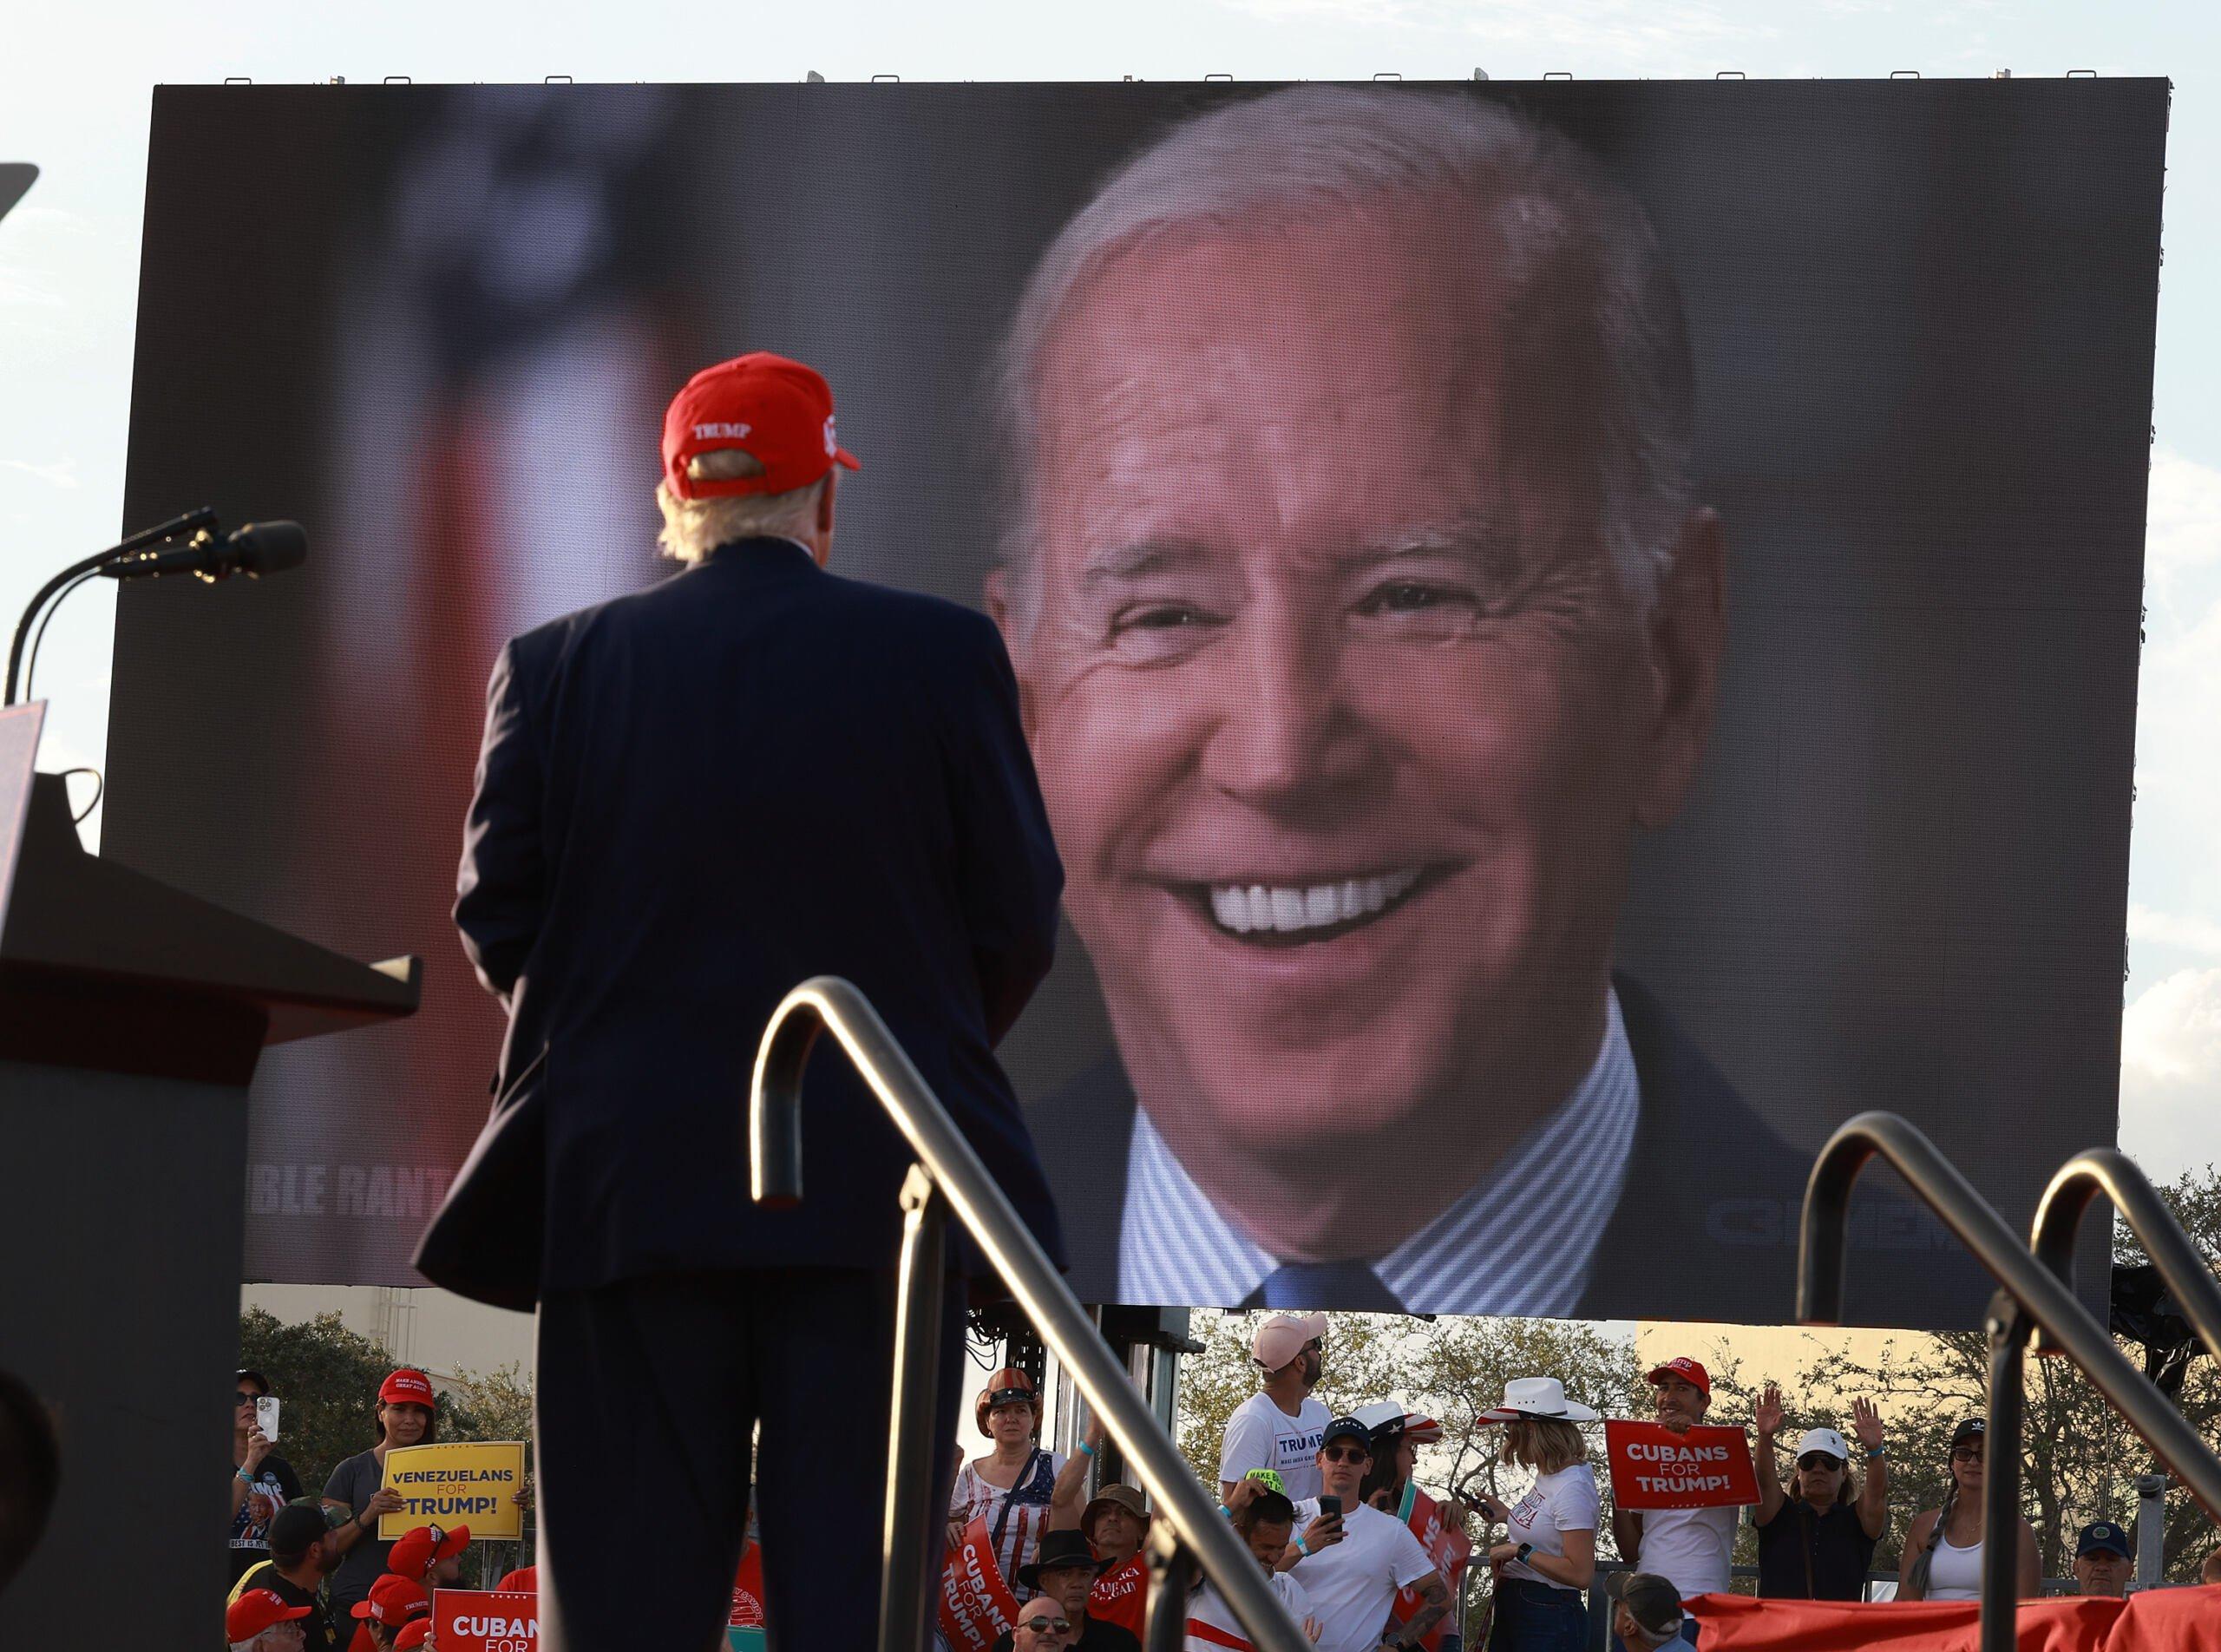 MIAMI, FLORIDA - NOVEMBER 06: Former U.S. President Donald Trump watches a video of President Joe Biden playing during a rally for Sen. Marco Rubio (R-FL) at the Miami-Dade Country Fair and Exposition on November 6, 2022 in Miami, Florida. Rubio faces U.S. Rep. Val Demings (D-FL) in his reelection bid in Tuesday's general election.   Joe Raedle/Getty Images/AFP (Photo by JOE RAEDLE / GETTY IMAGES NORTH AMERICA / Getty Images via AFP)